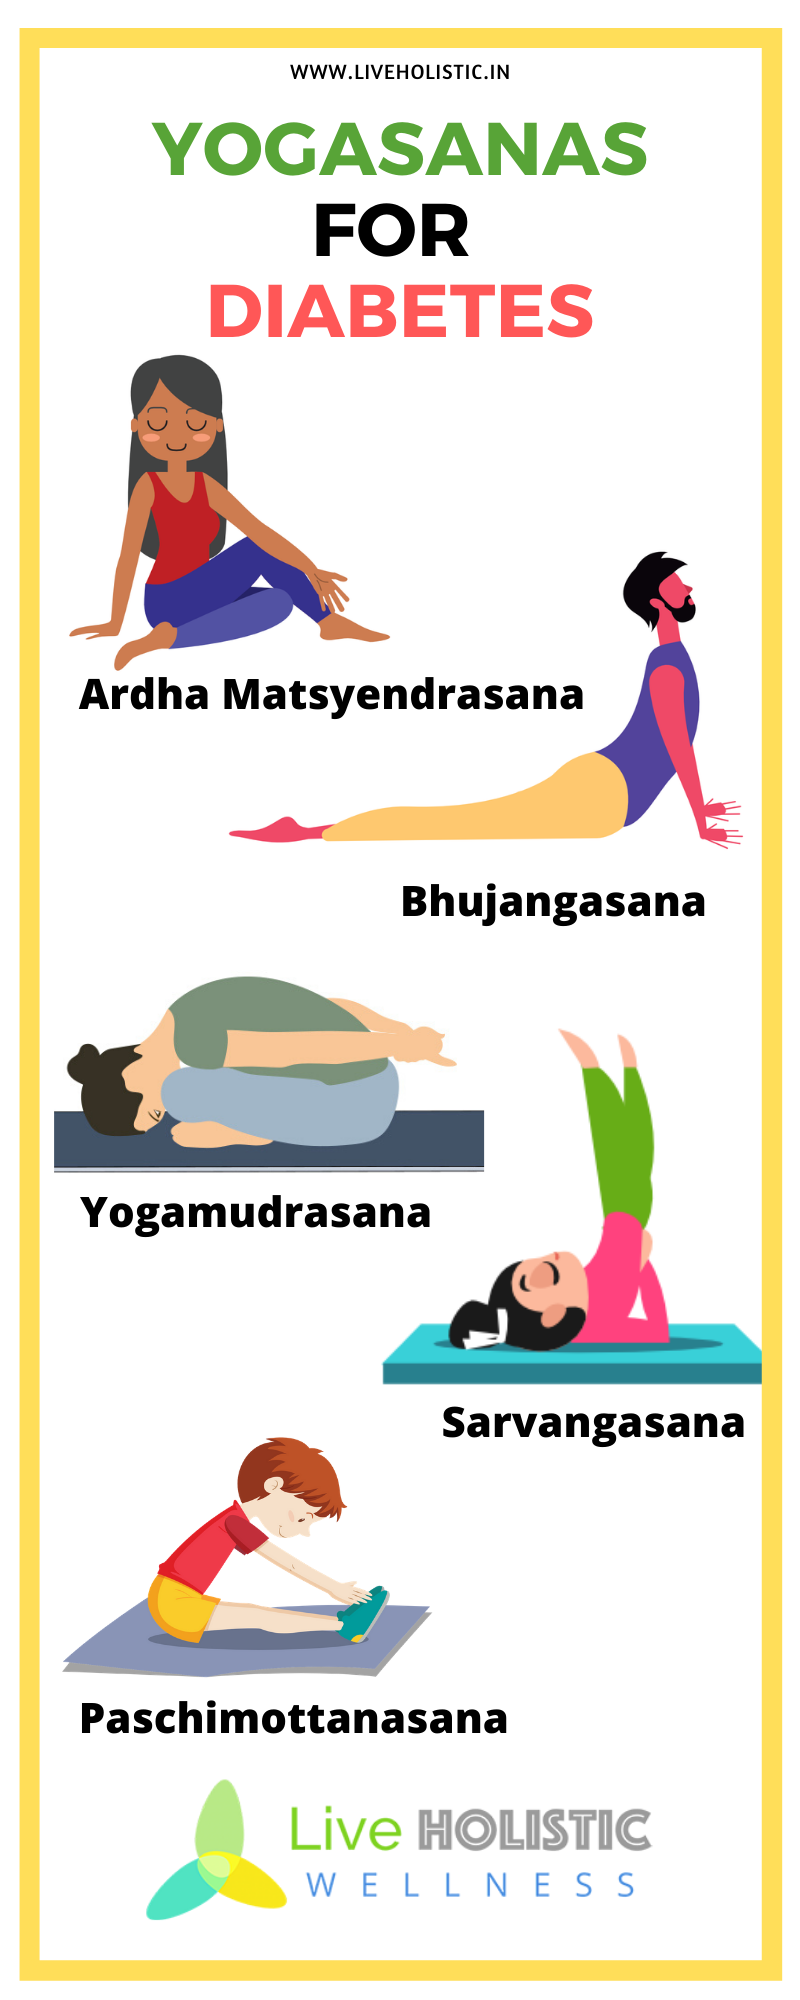 Which yoga poses are for sugar patients? - Quora